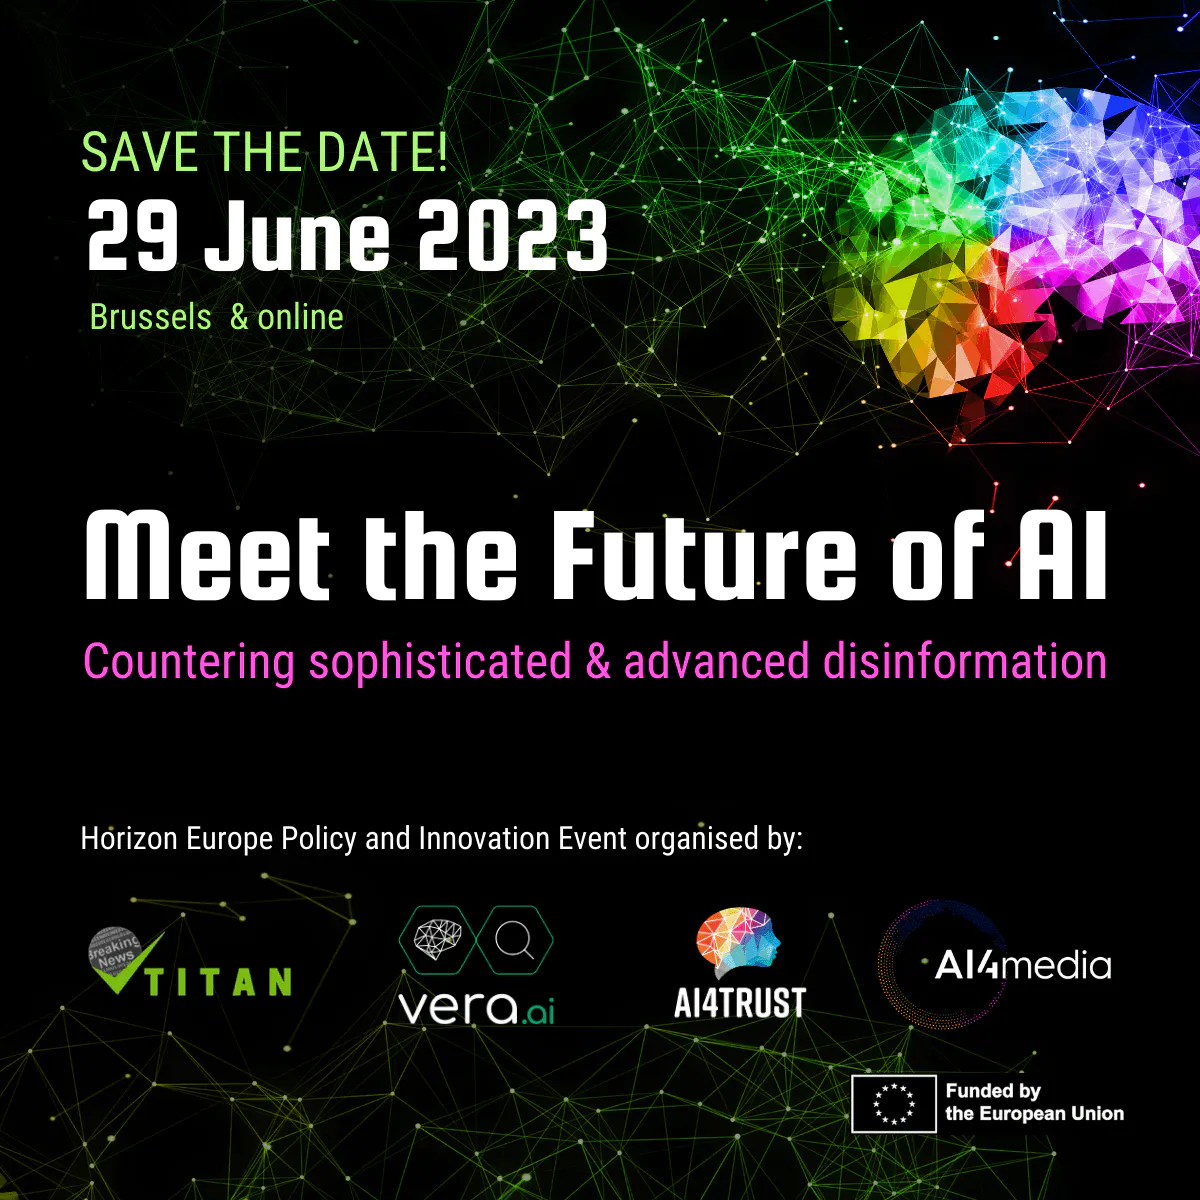 Conference on the future of AI – and what this means for (countering) disinformation